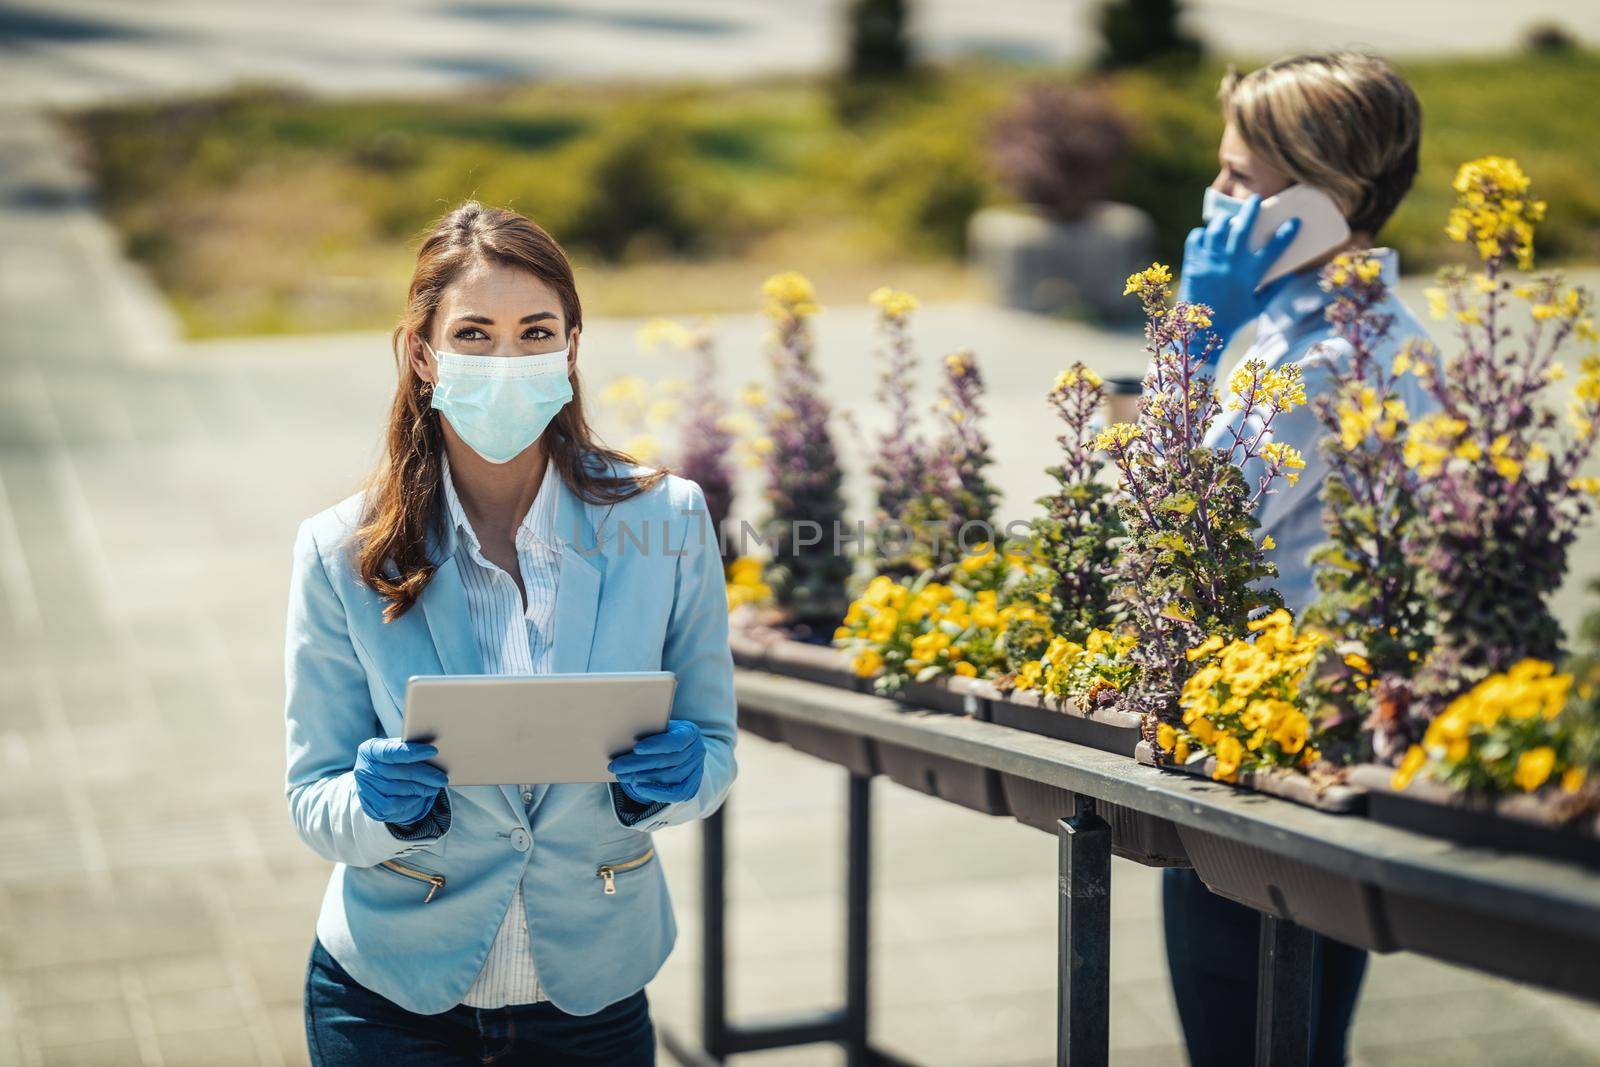 Young business woman with protective mask on her face is looking something on her digital tablet outdoor during COVID 19 pandemic.